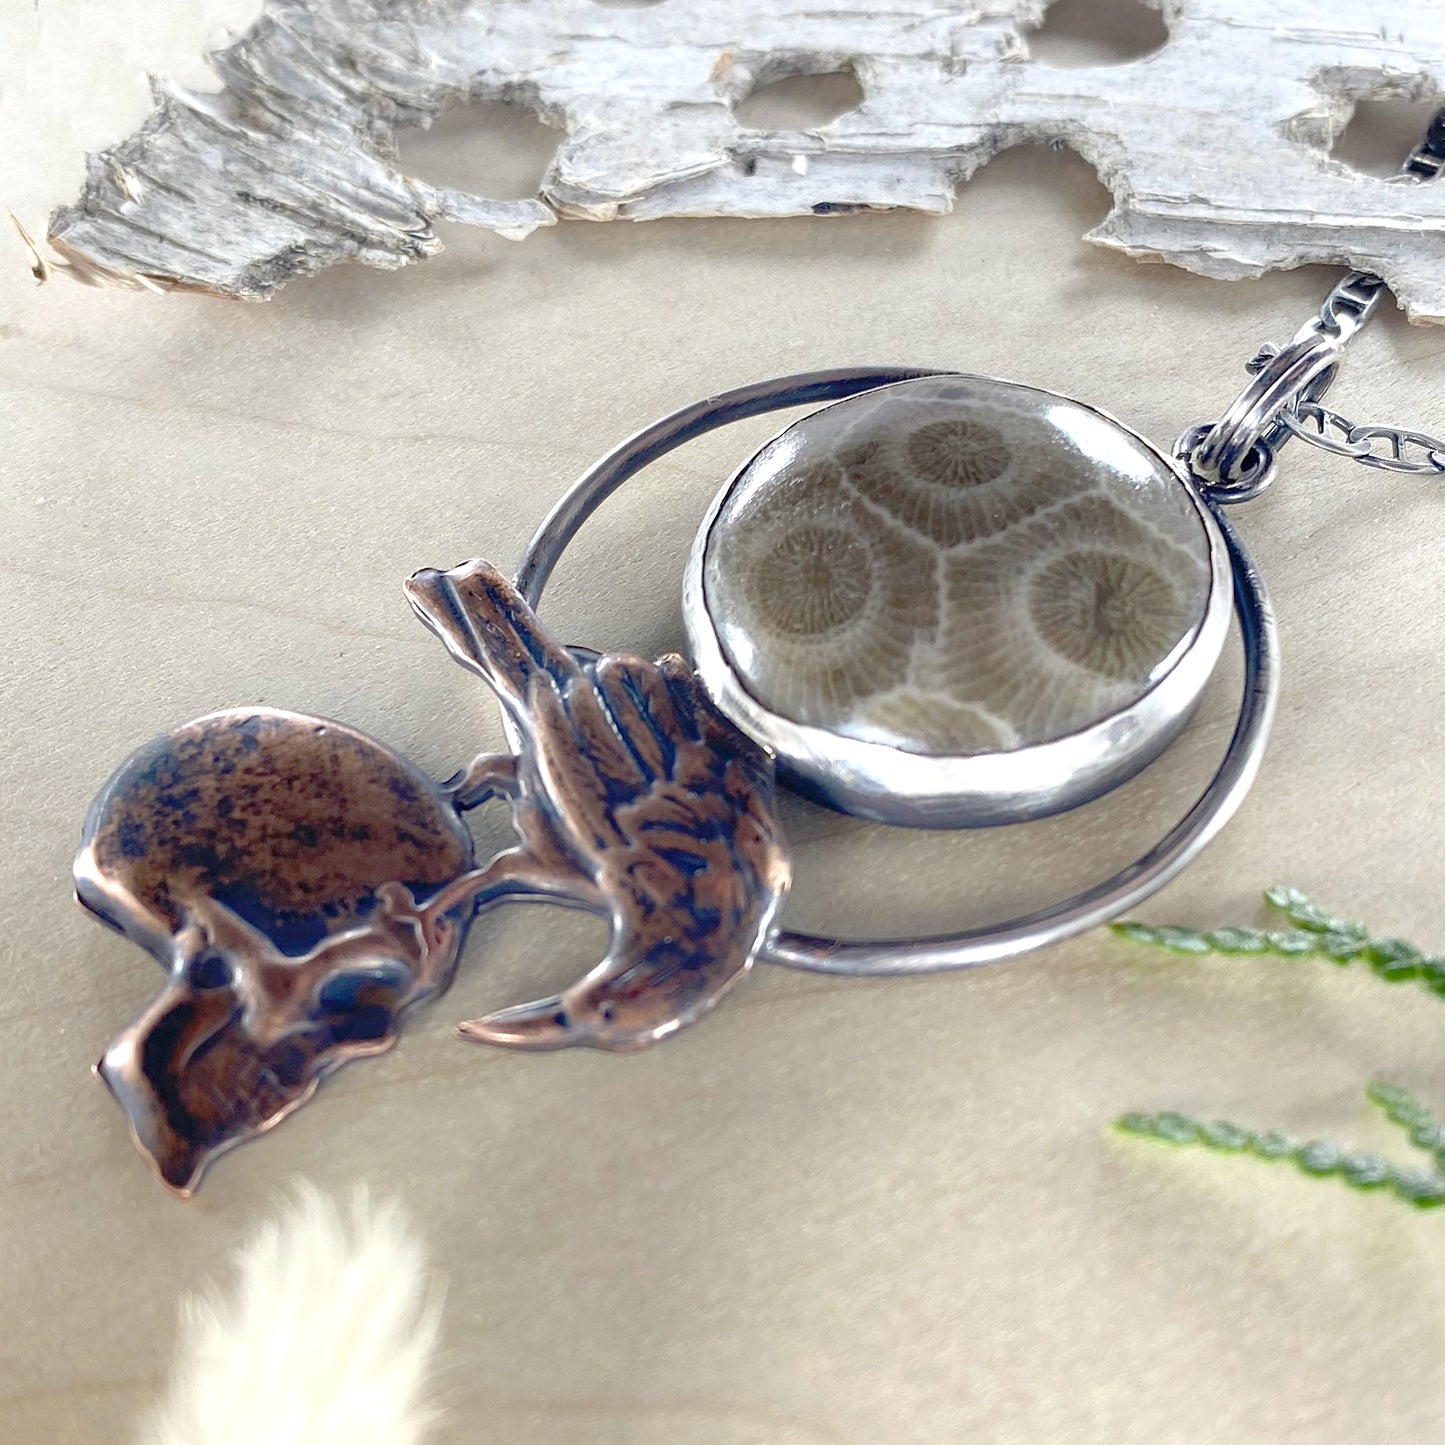 Petoskey Stone with Raven and Skull - Stone Treasures by the Lake